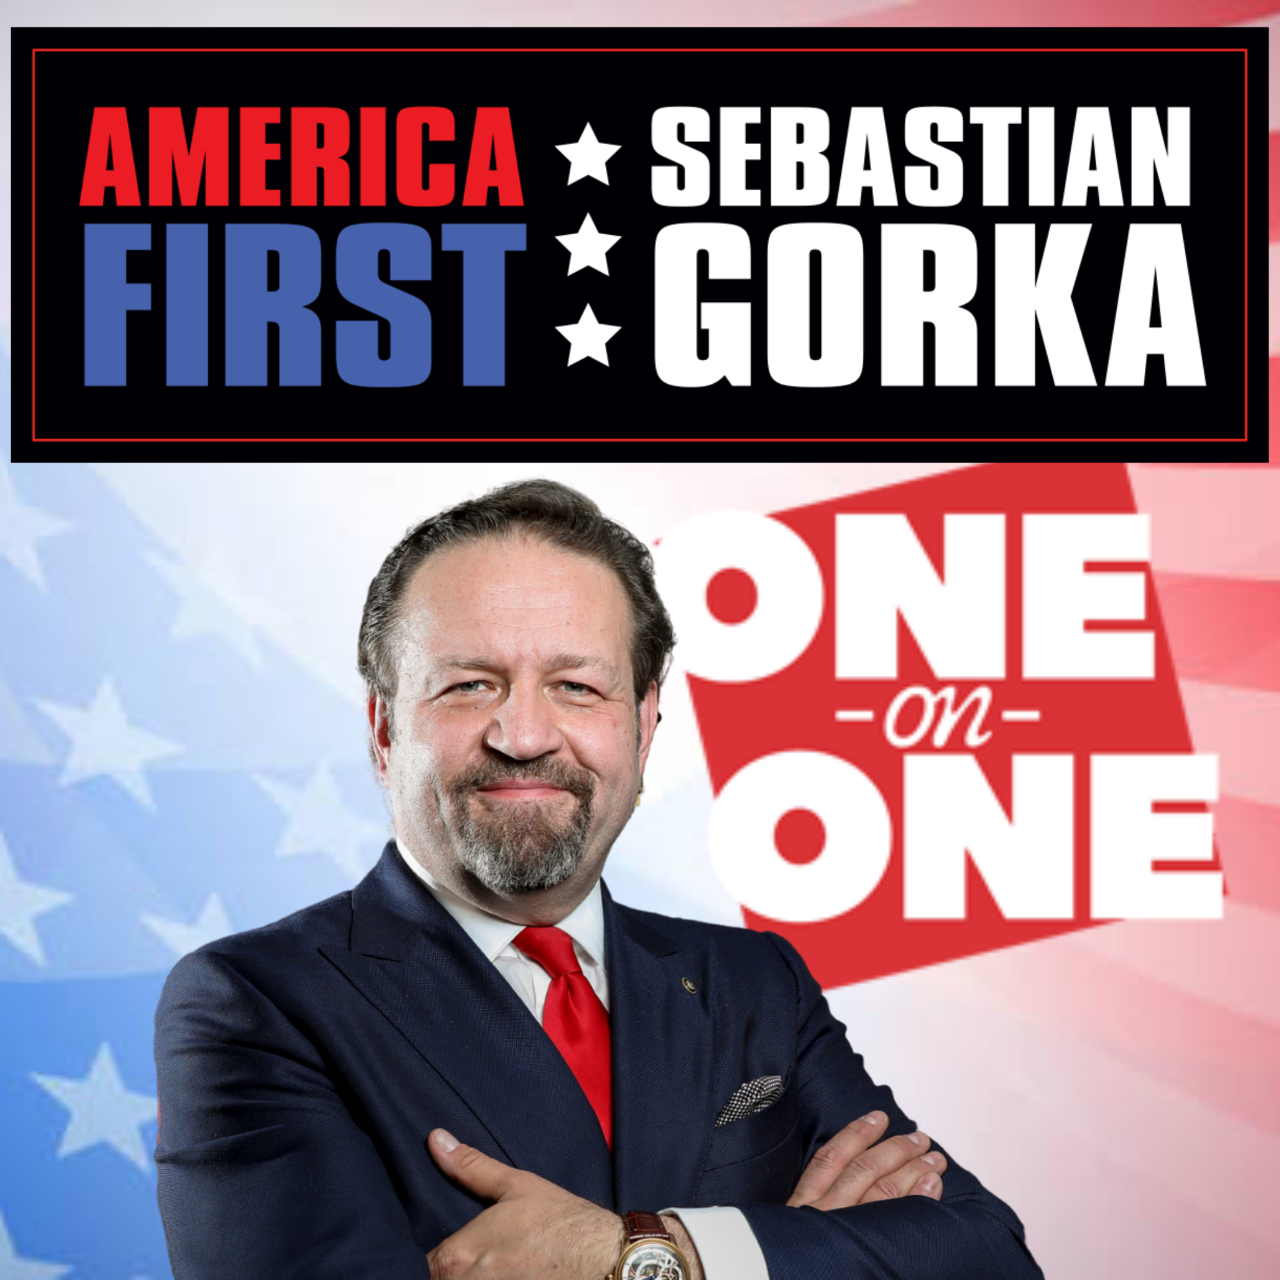 MAGA is stronger than in 2016. Chris Buskirk on America First One on One